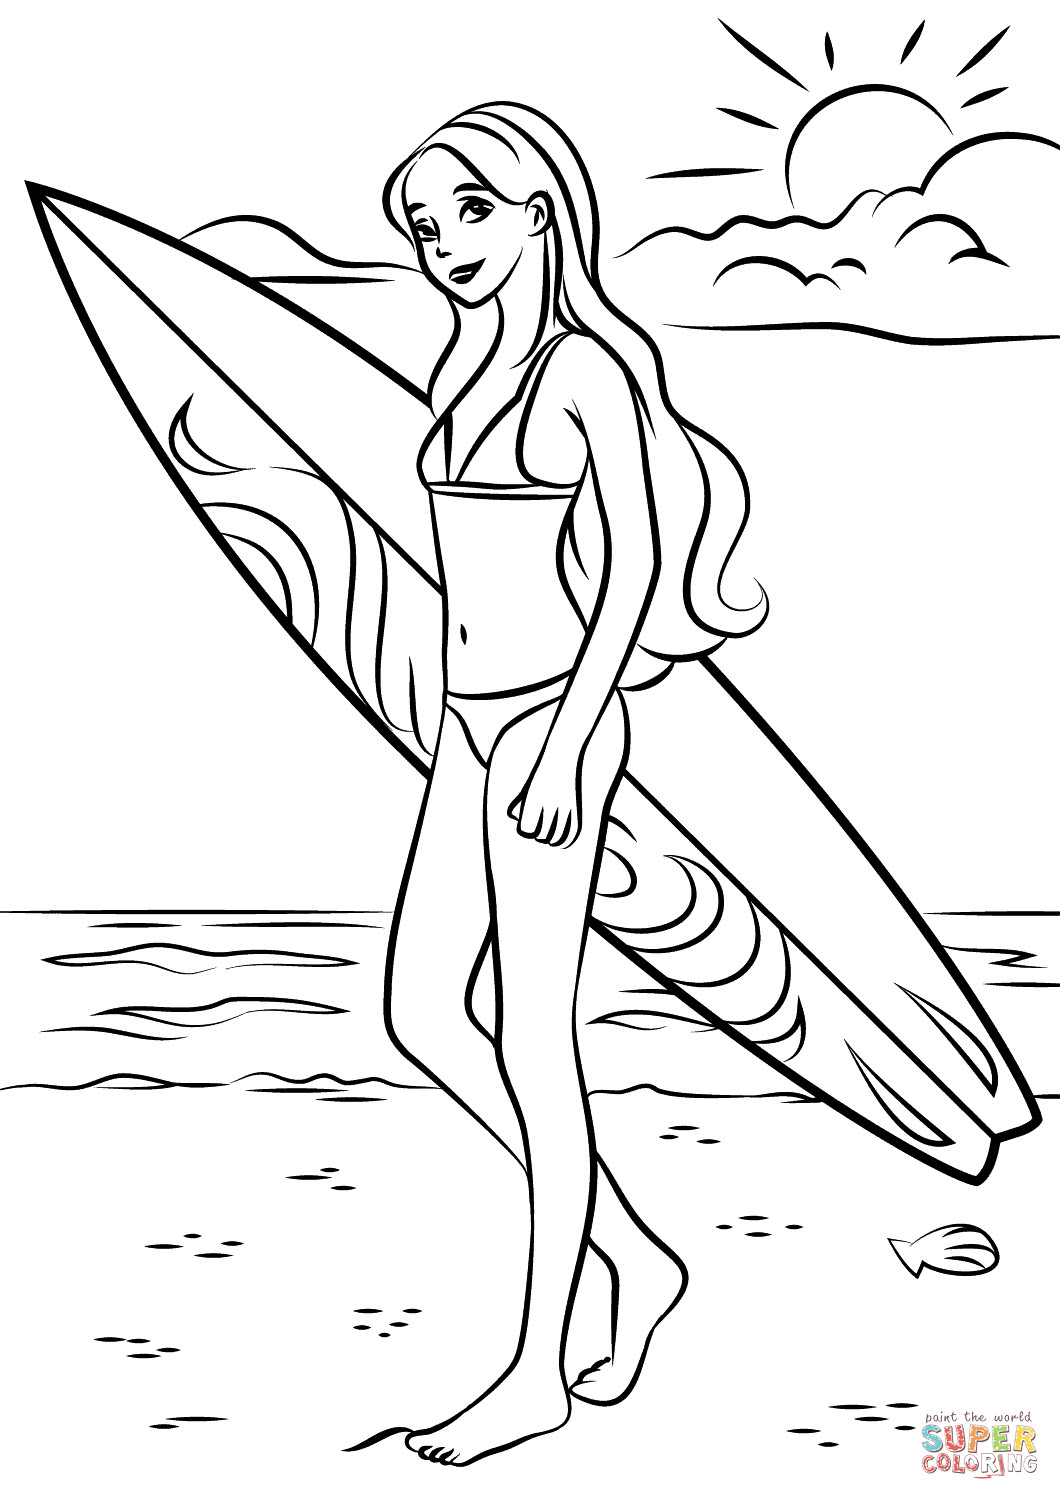 Surfing Coloring Pages
 Barbie Surfer coloring page